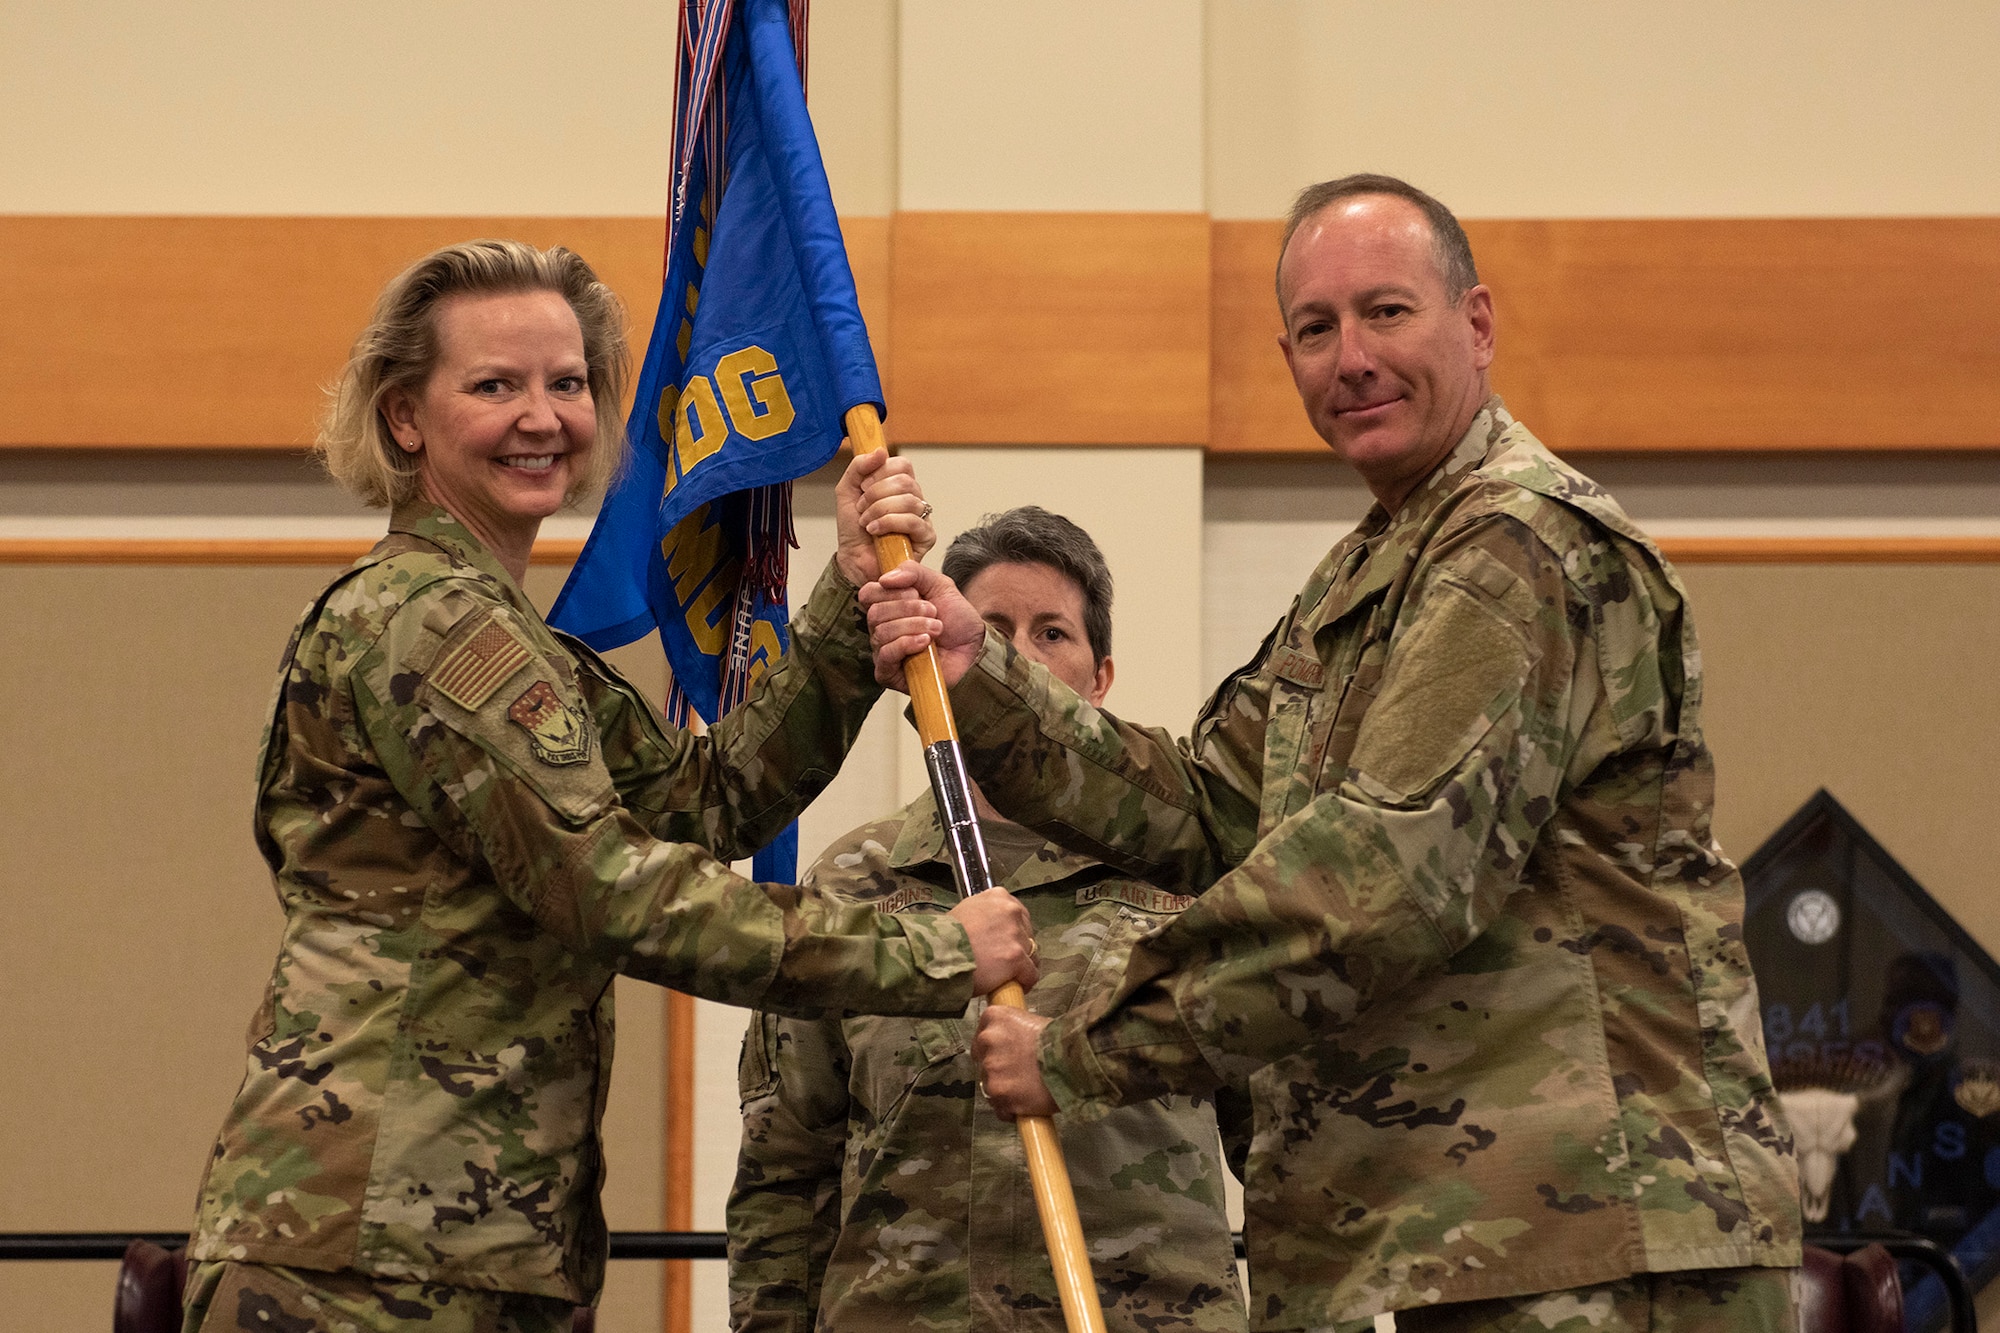 Col. Mark Pomerinke, right, accepts command of the 341st Medical Group from Col. Jennifer Reeves, 341st Missile Wing commander, during a change of command ceremony June 26, 2020, at Malmstrom Air Force Base, Mont.